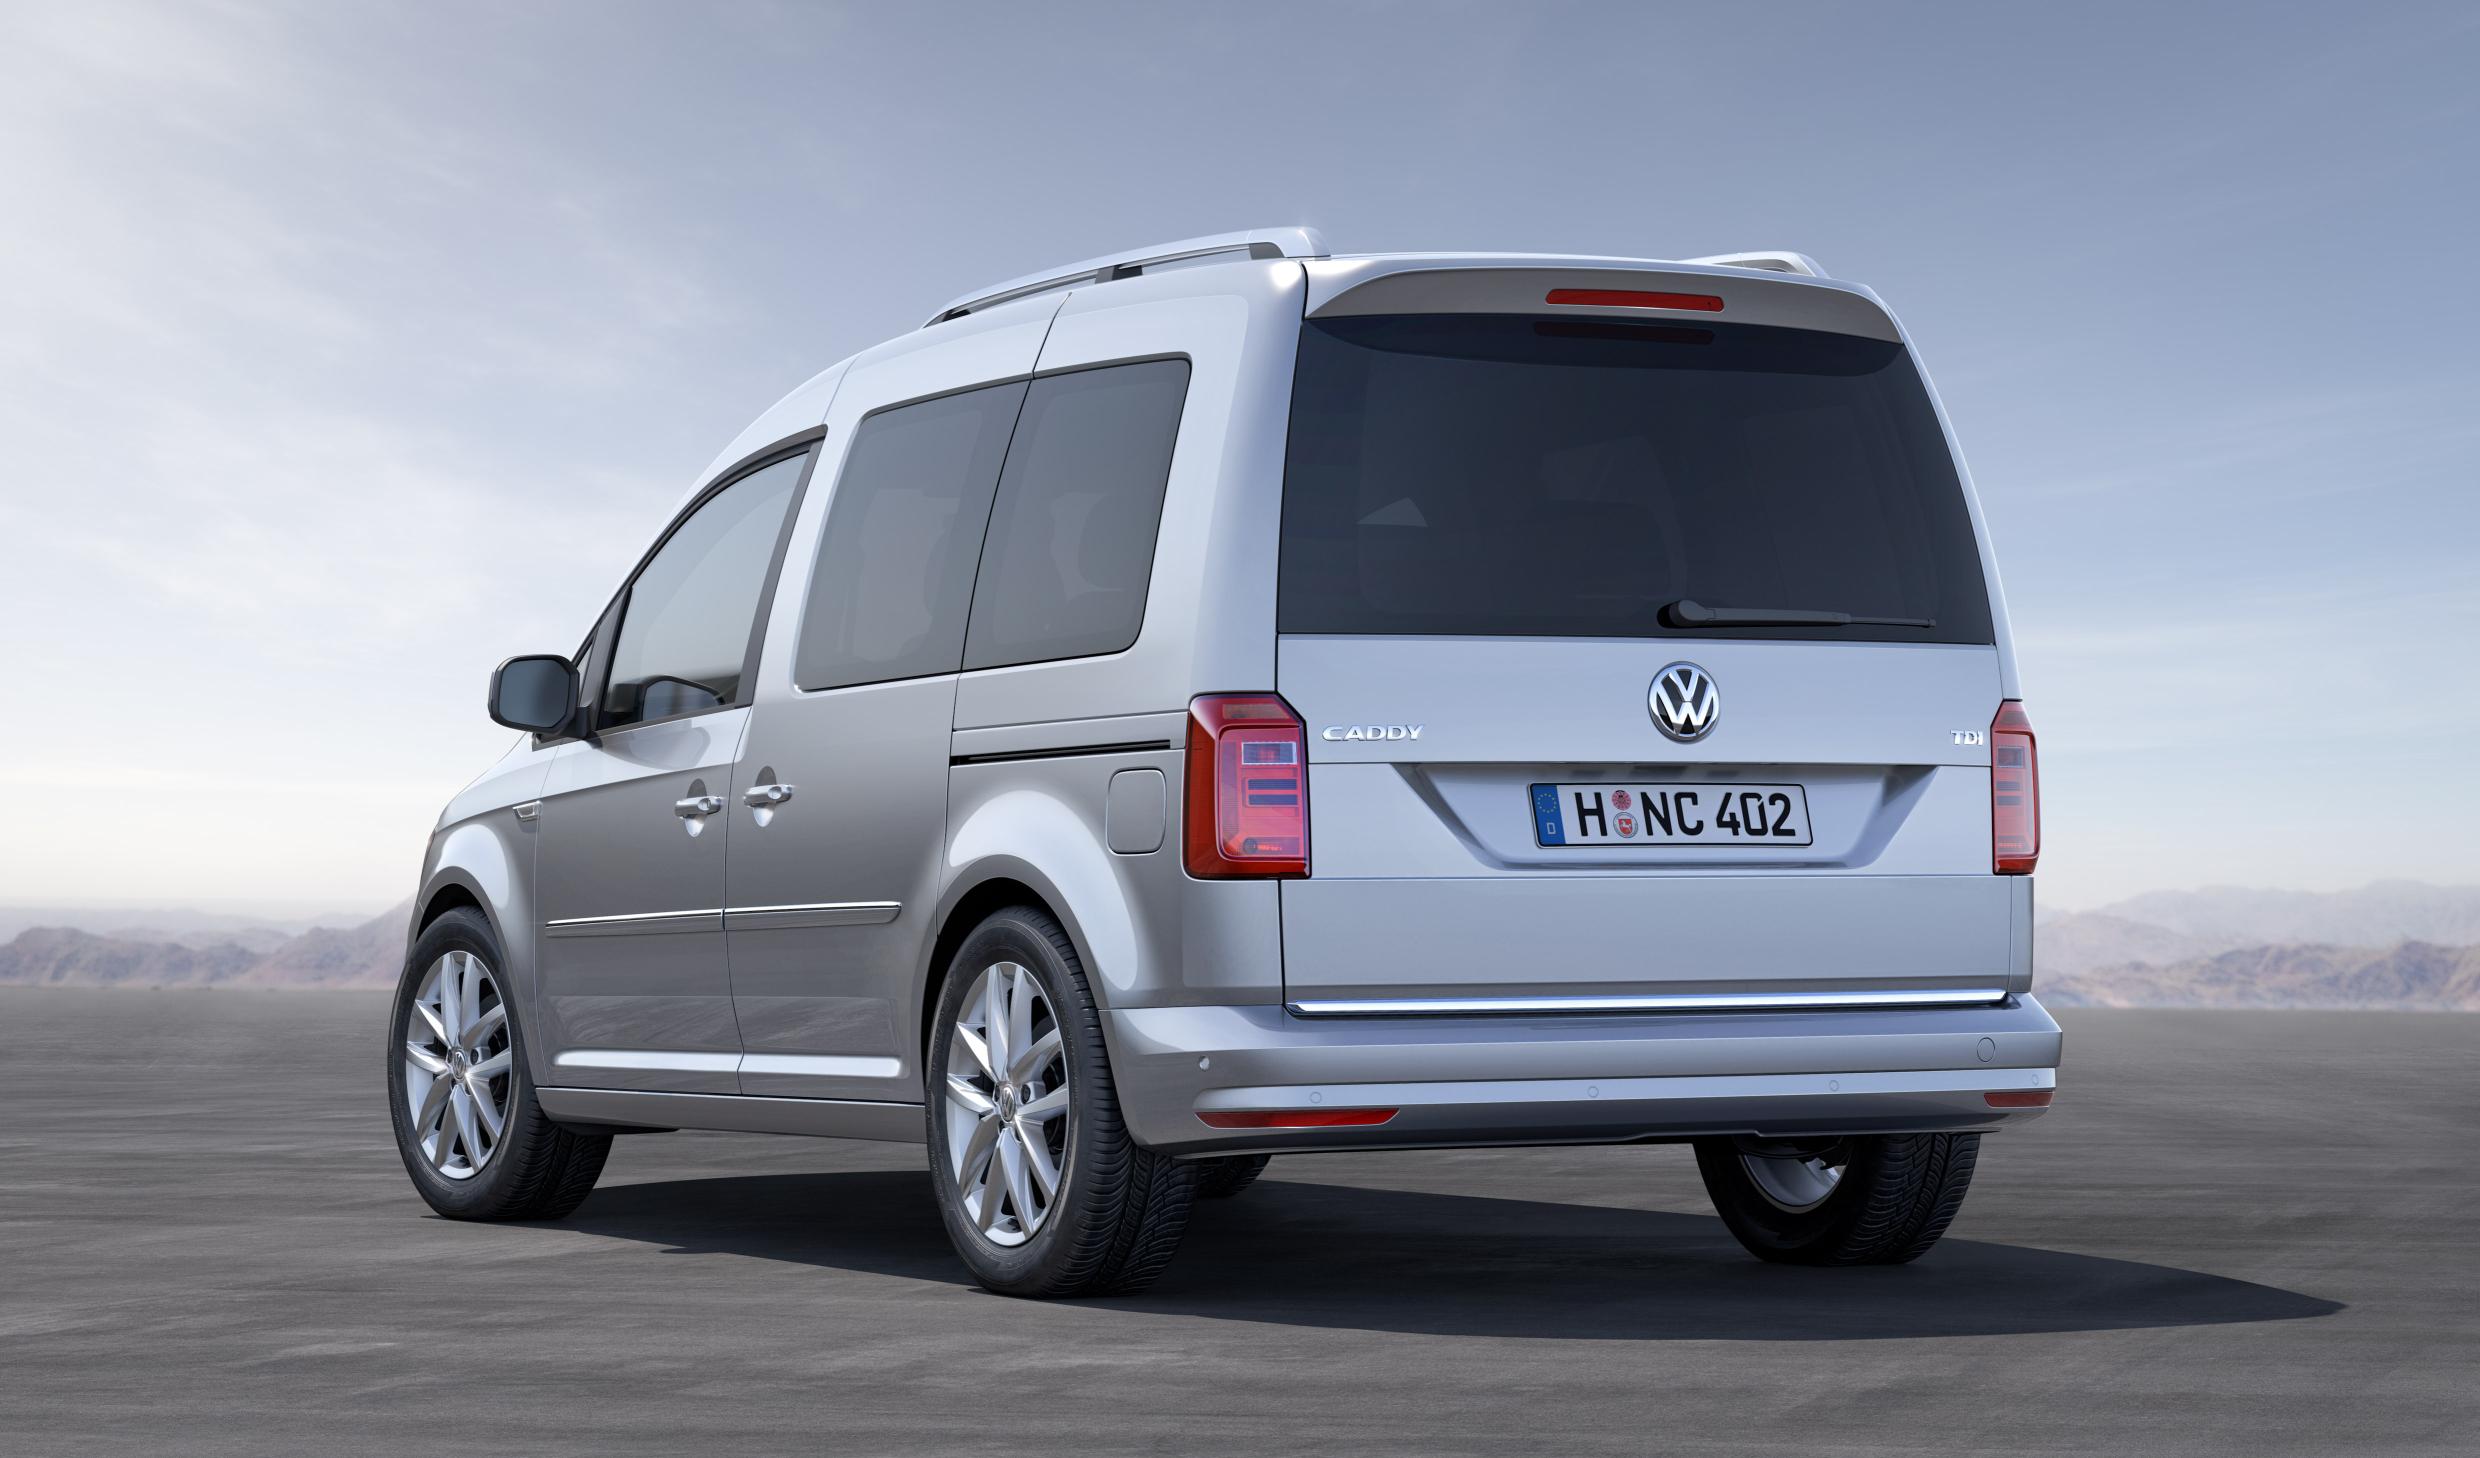 THE NEW VOLKSWAGEN CADDY - WORLD PREMIERE OF THE FOURTH GENERATION BESTjpg